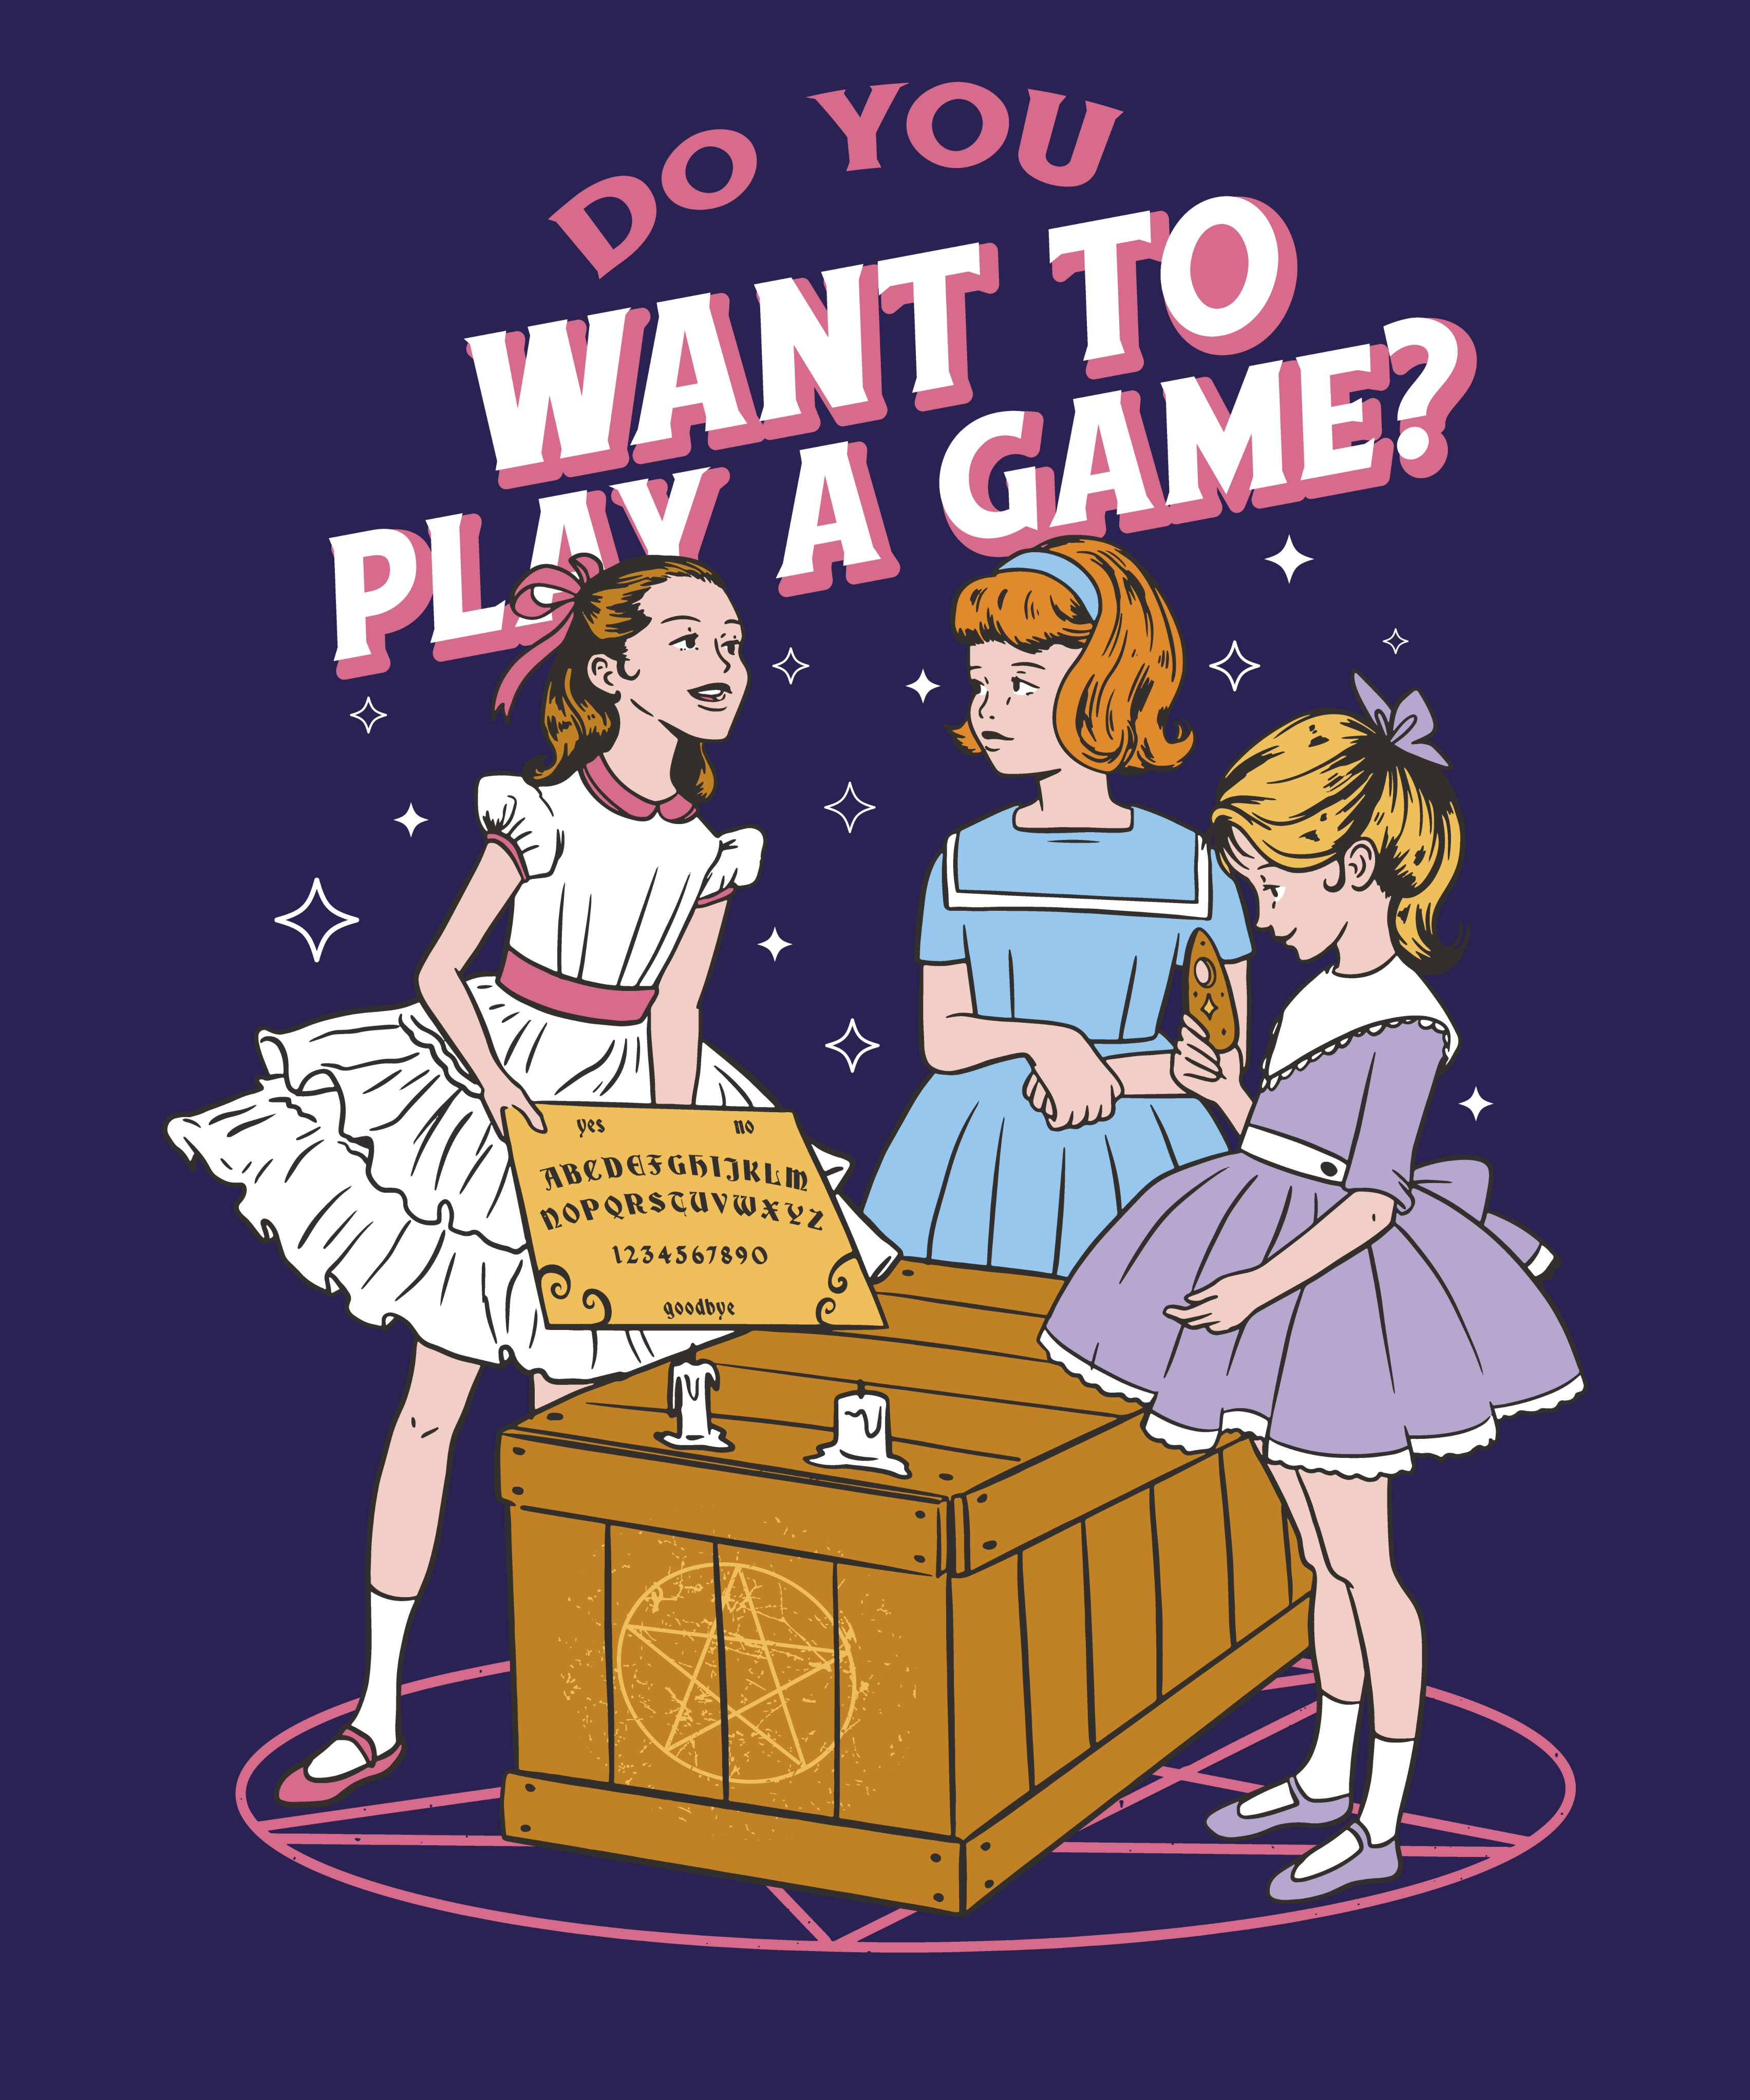 Do you want to play a game while wearing our exclusive "Do You Want to Play a Game?" T-shirt?